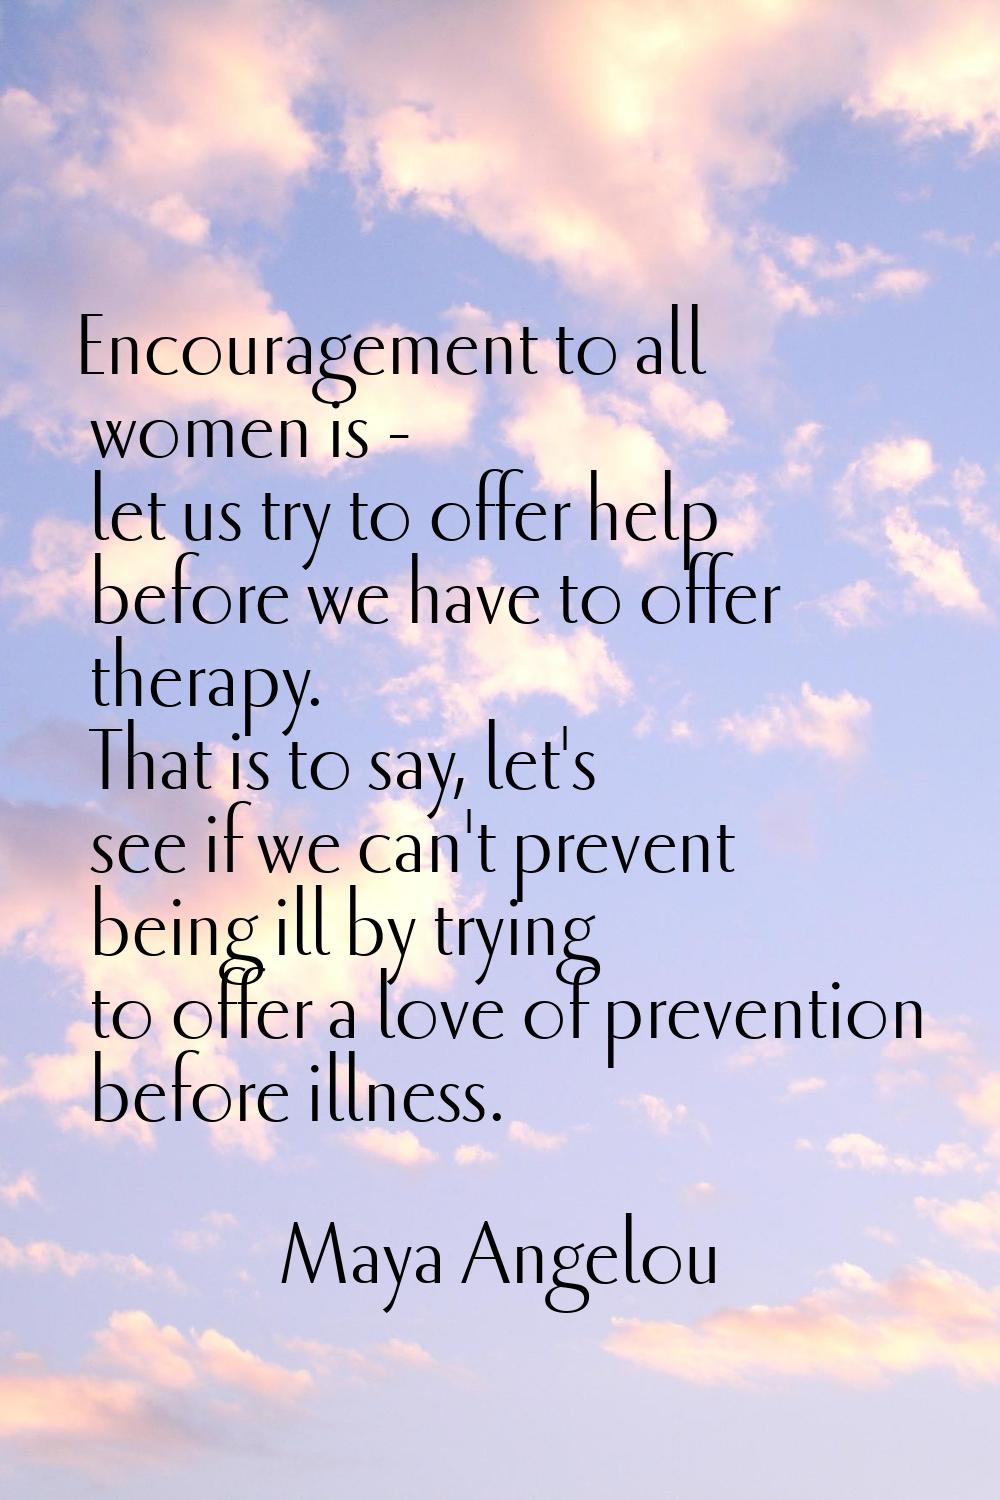 Encouragement to all women is - let us try to offer help before we have to offer therapy. That is t